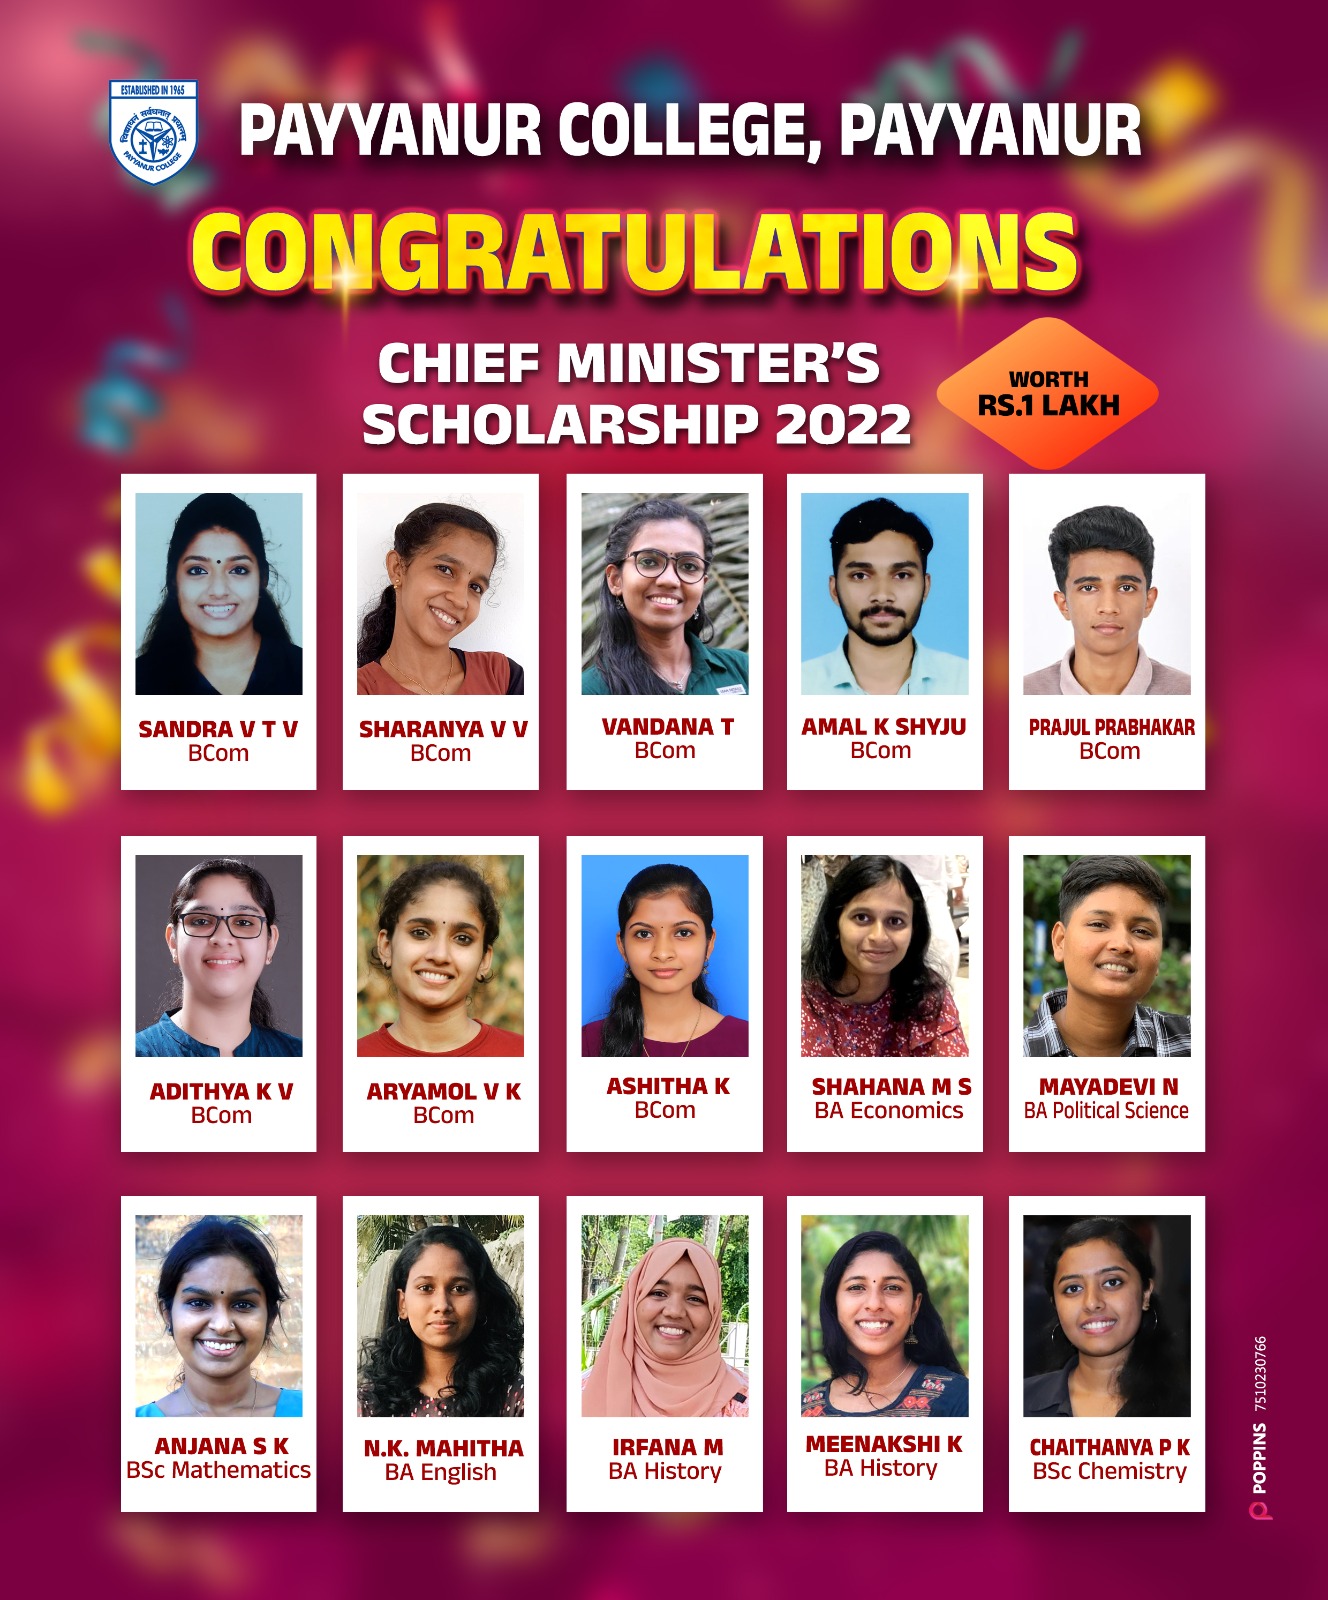 Chief Minister’s Scholarship 2022